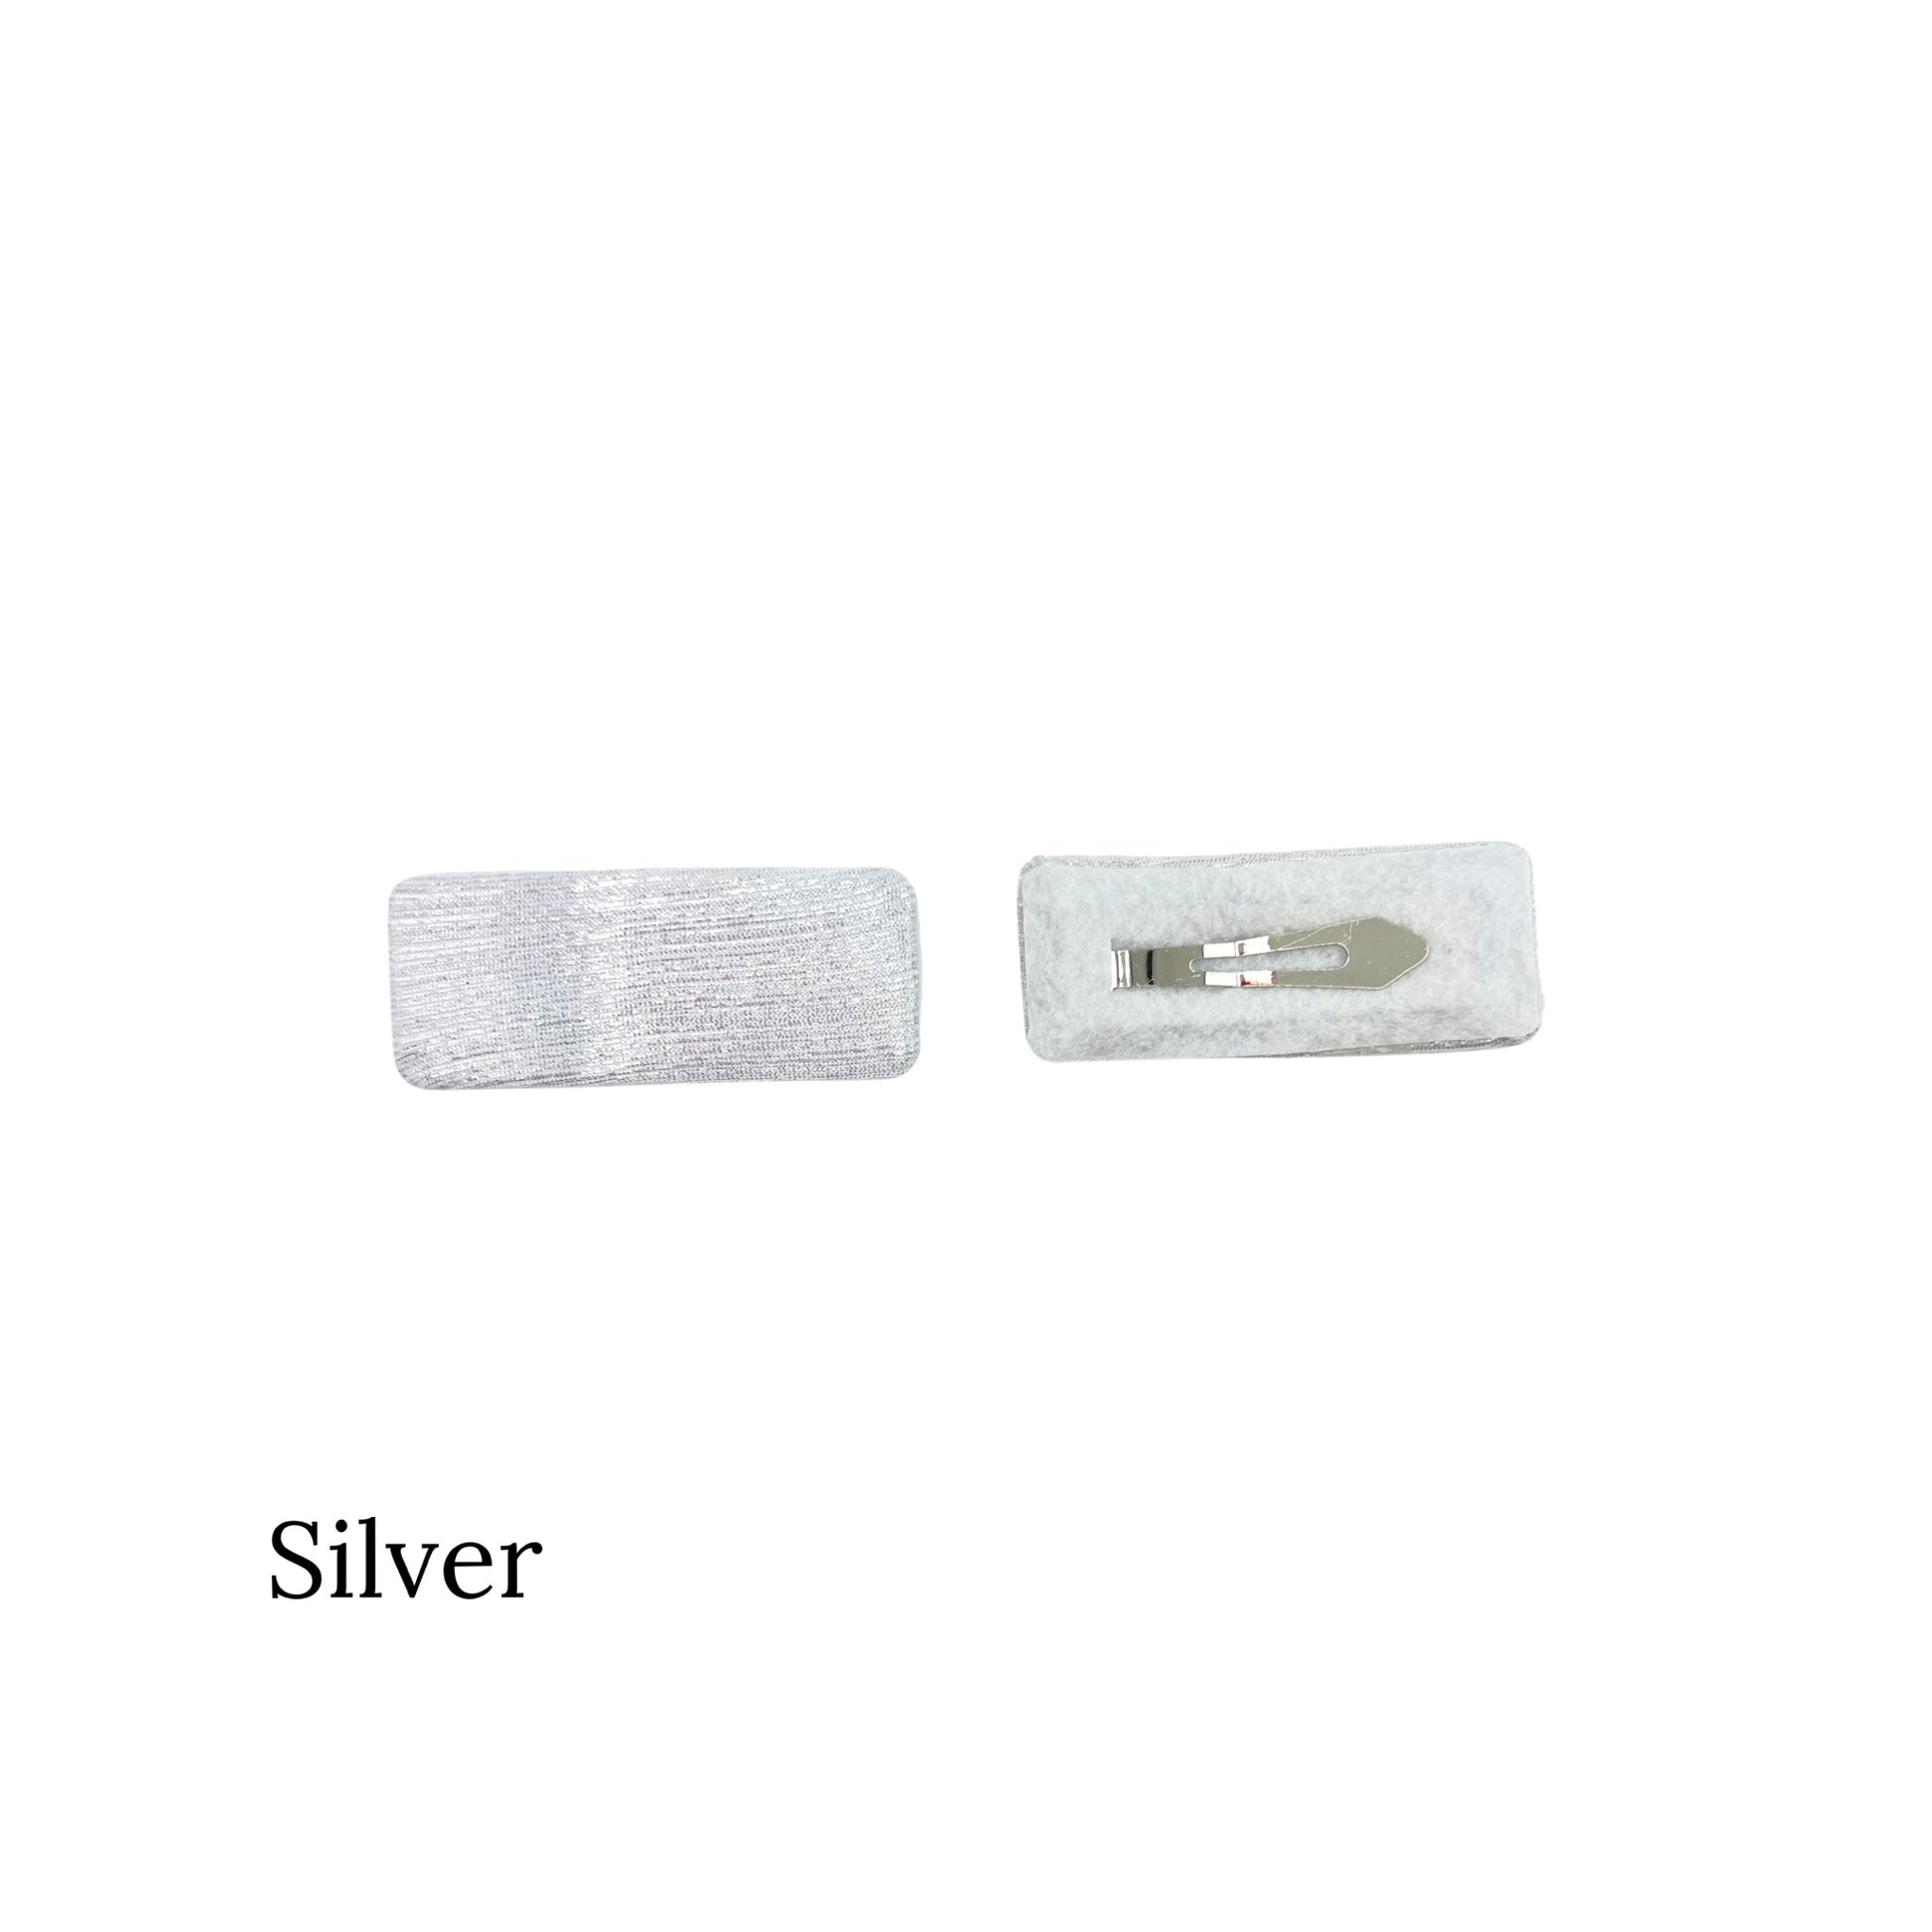 Silver shimmer clip on a white background